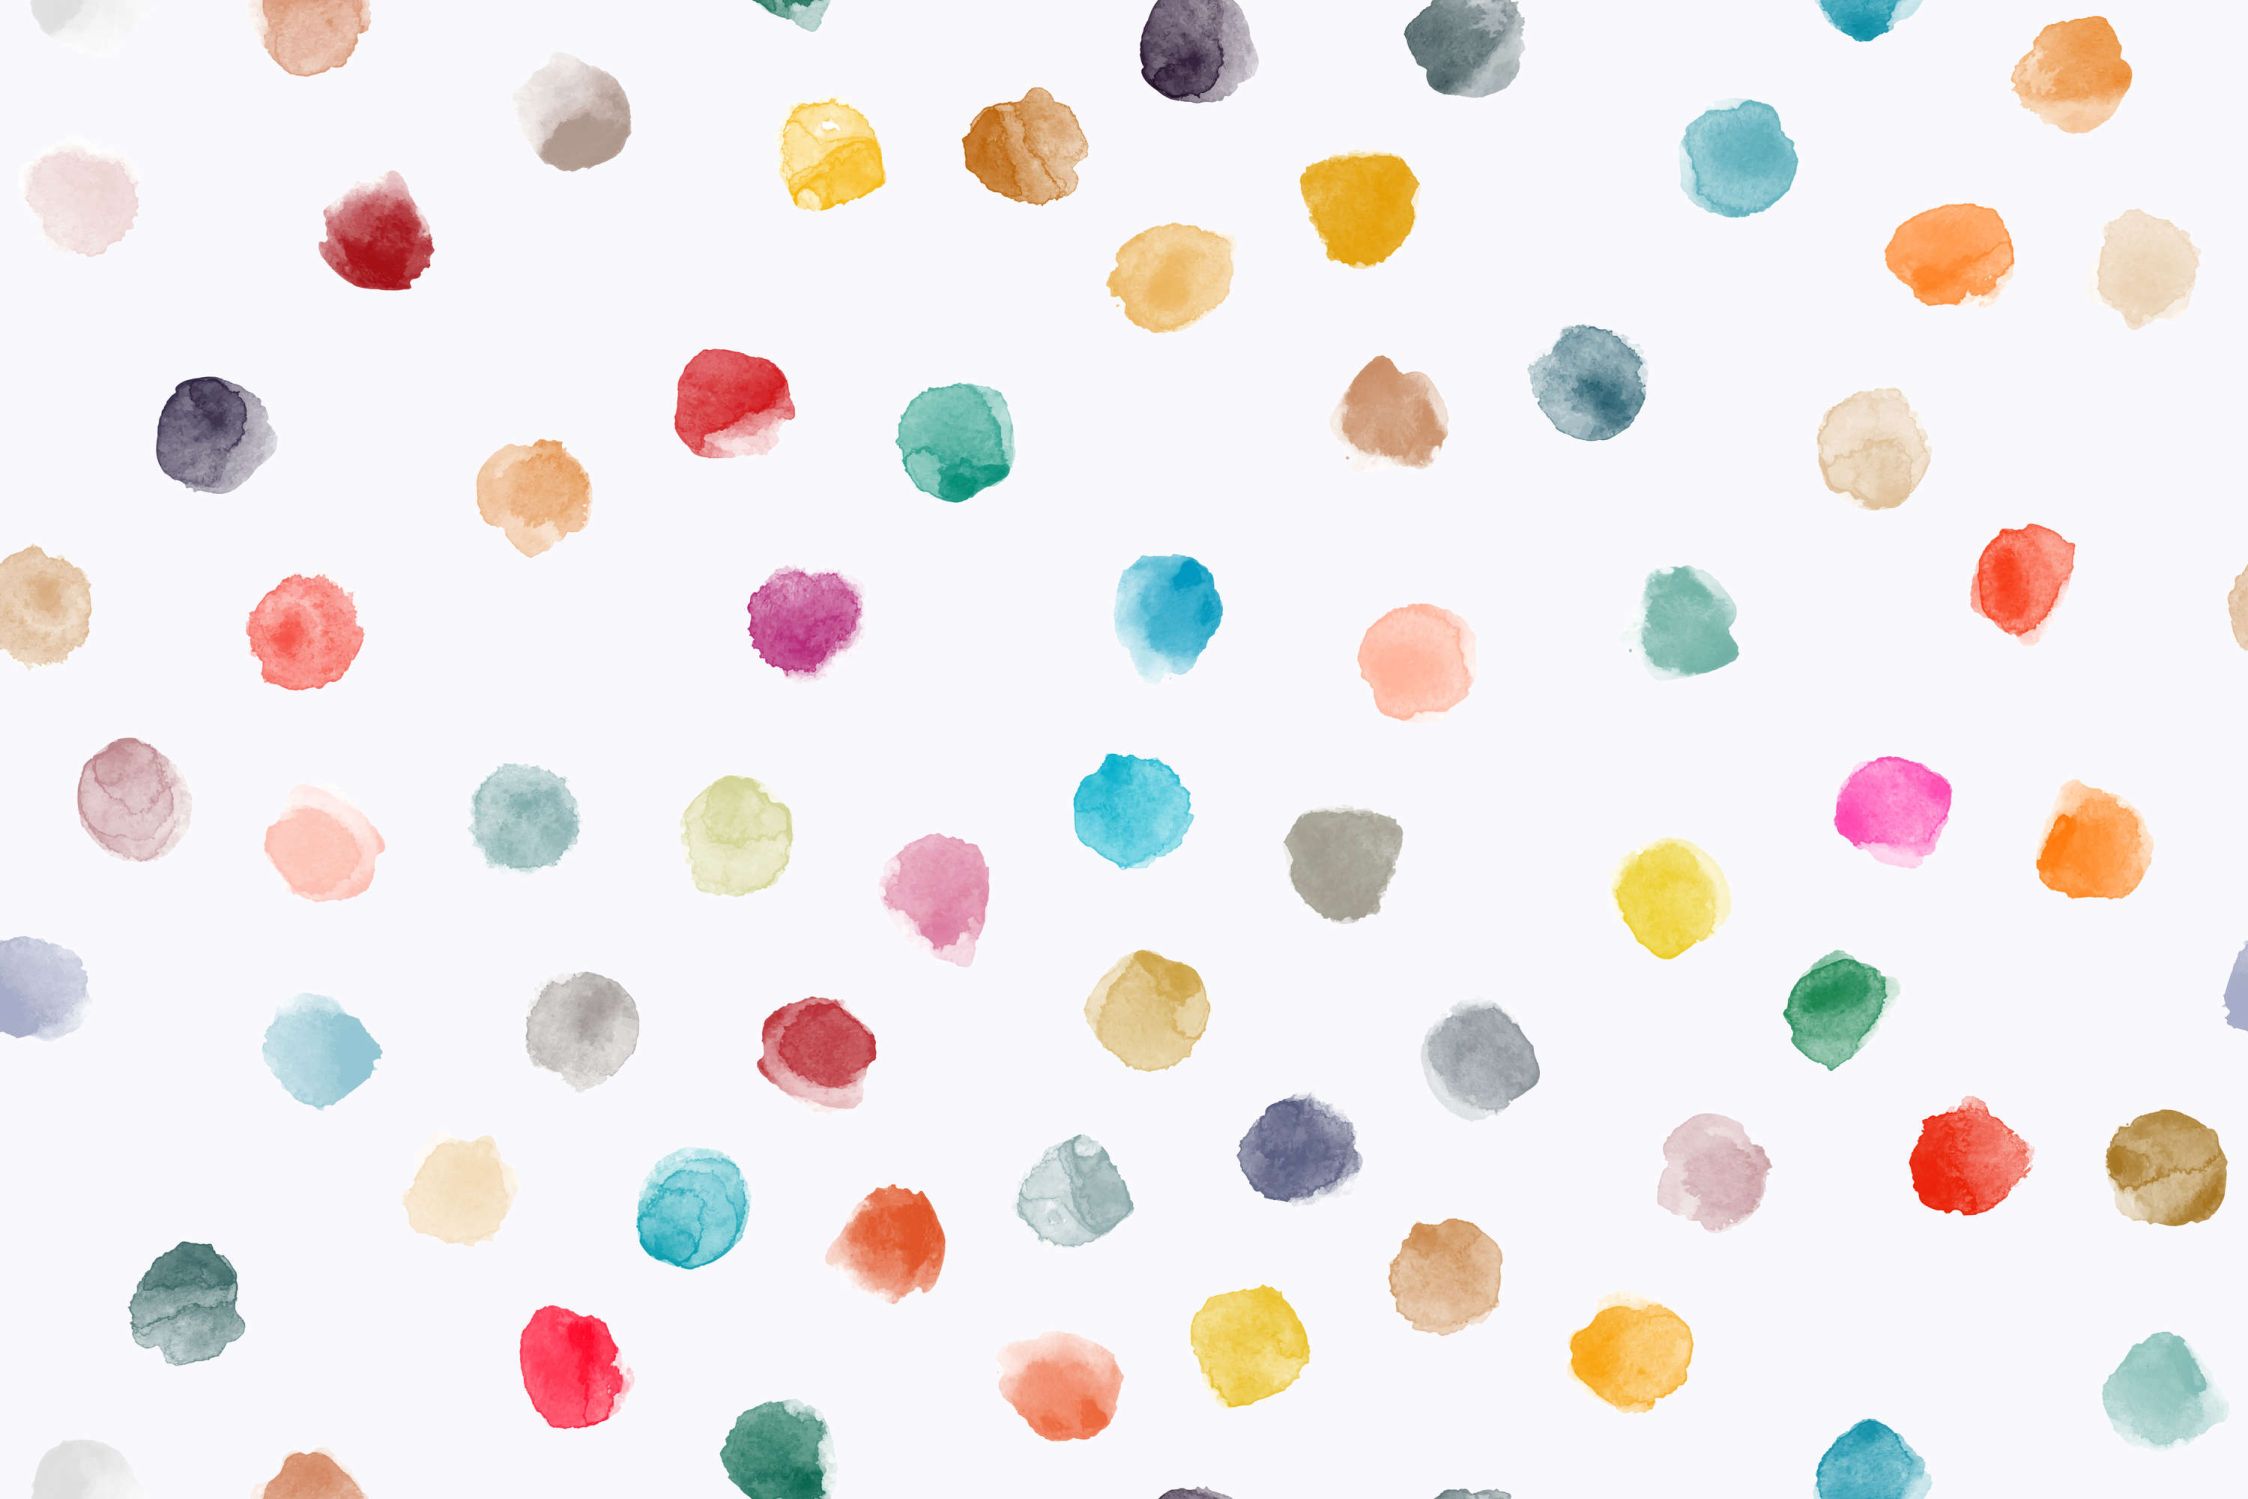             Nursery mural with colourful dots - Smooth & pearlescent fleece
        